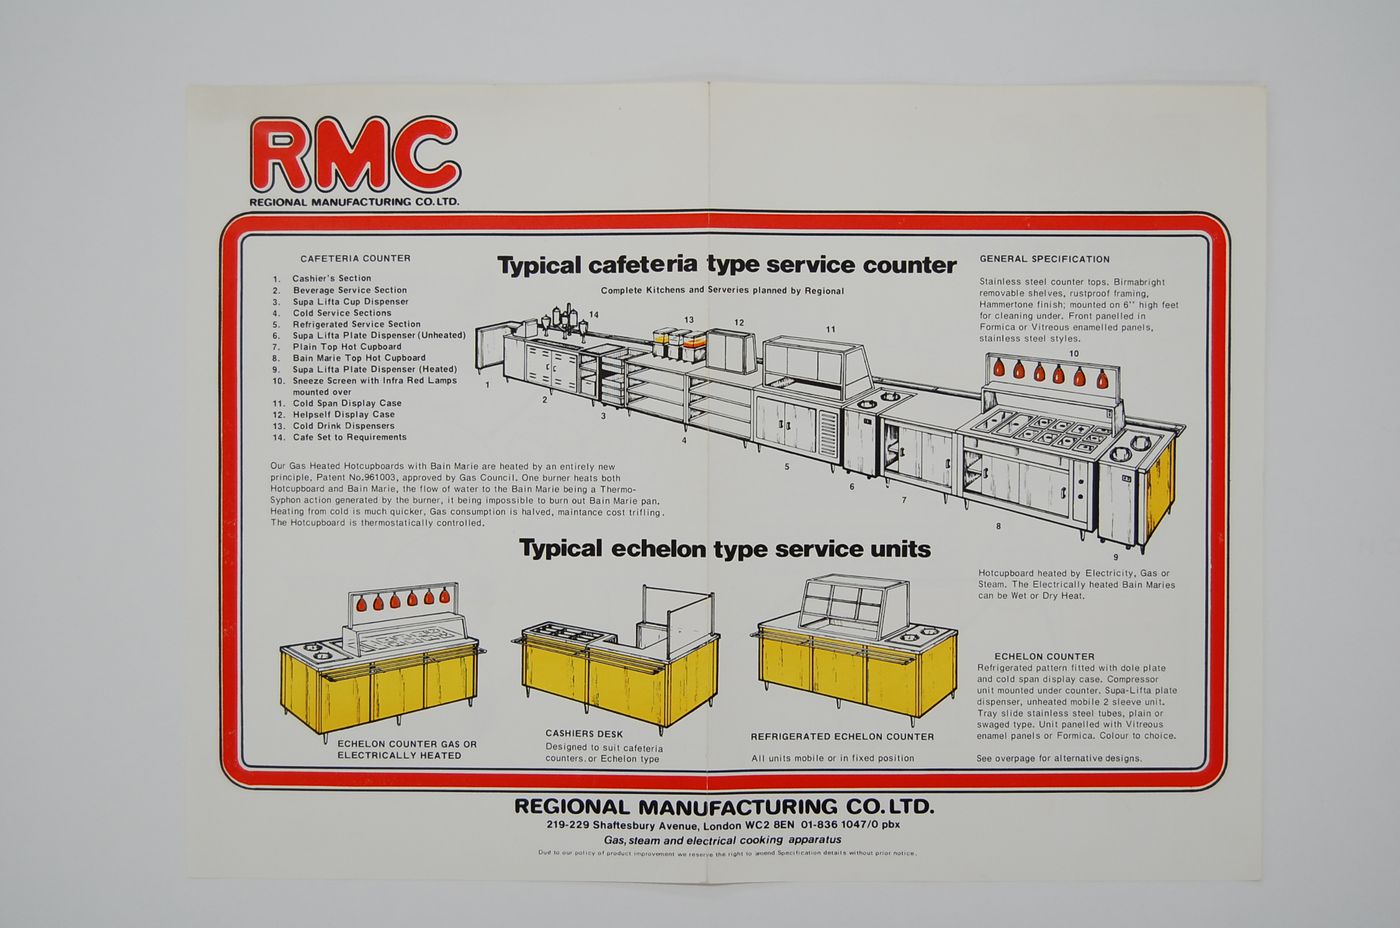 Broadside advertising RMC typical cafeteria type service counter